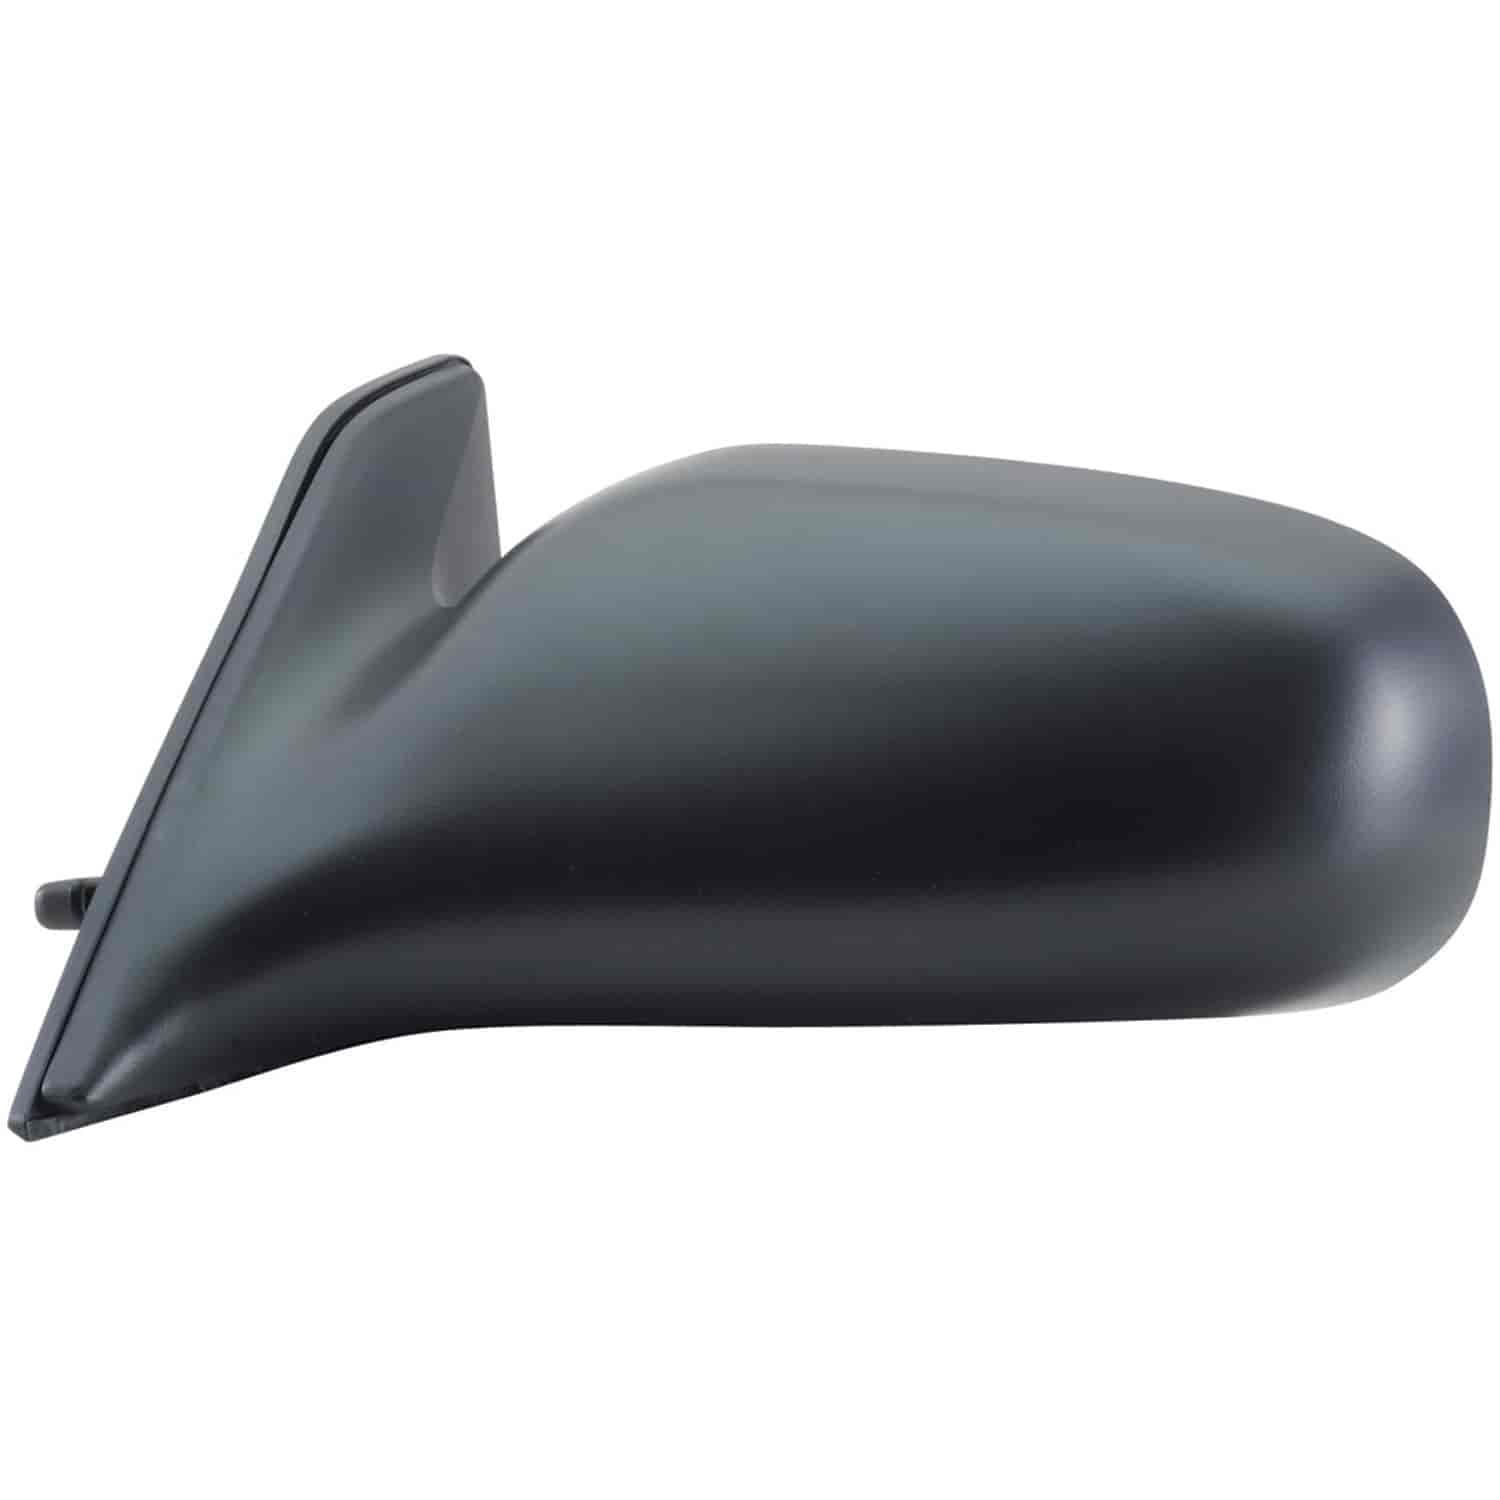 OEM Style Replacement mirror for 91-94 Toyota Tercel 2 door; Toyota Tercel 4 door driver side mirror